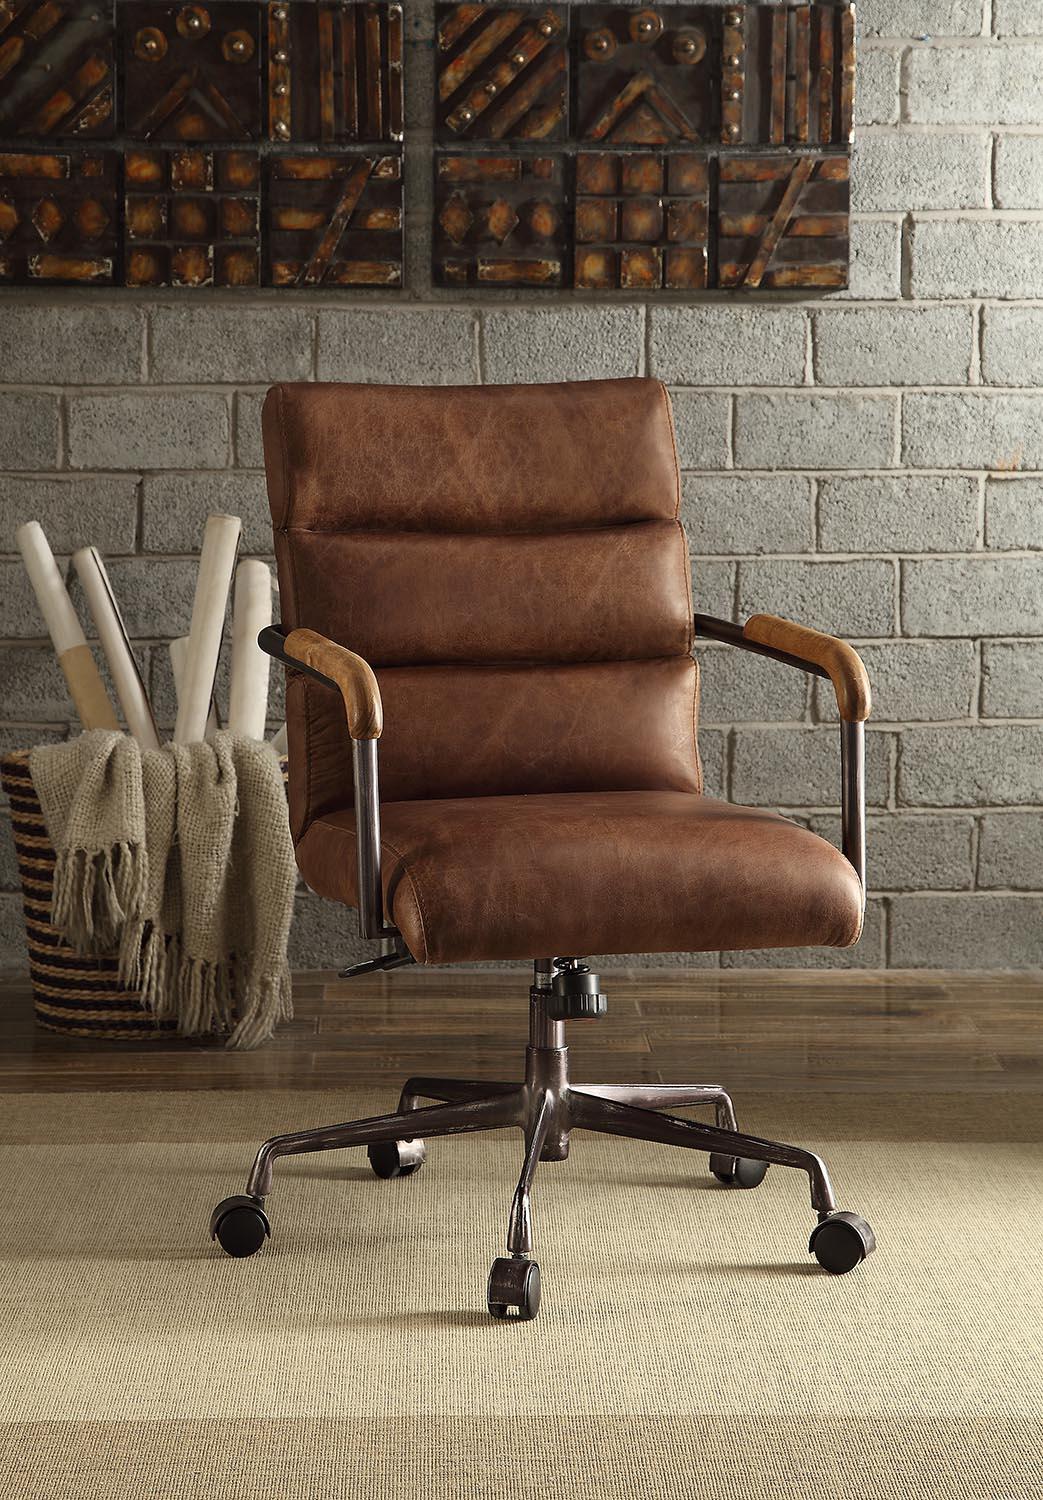 Buo Leather Executive Office Chair - Retro Brown